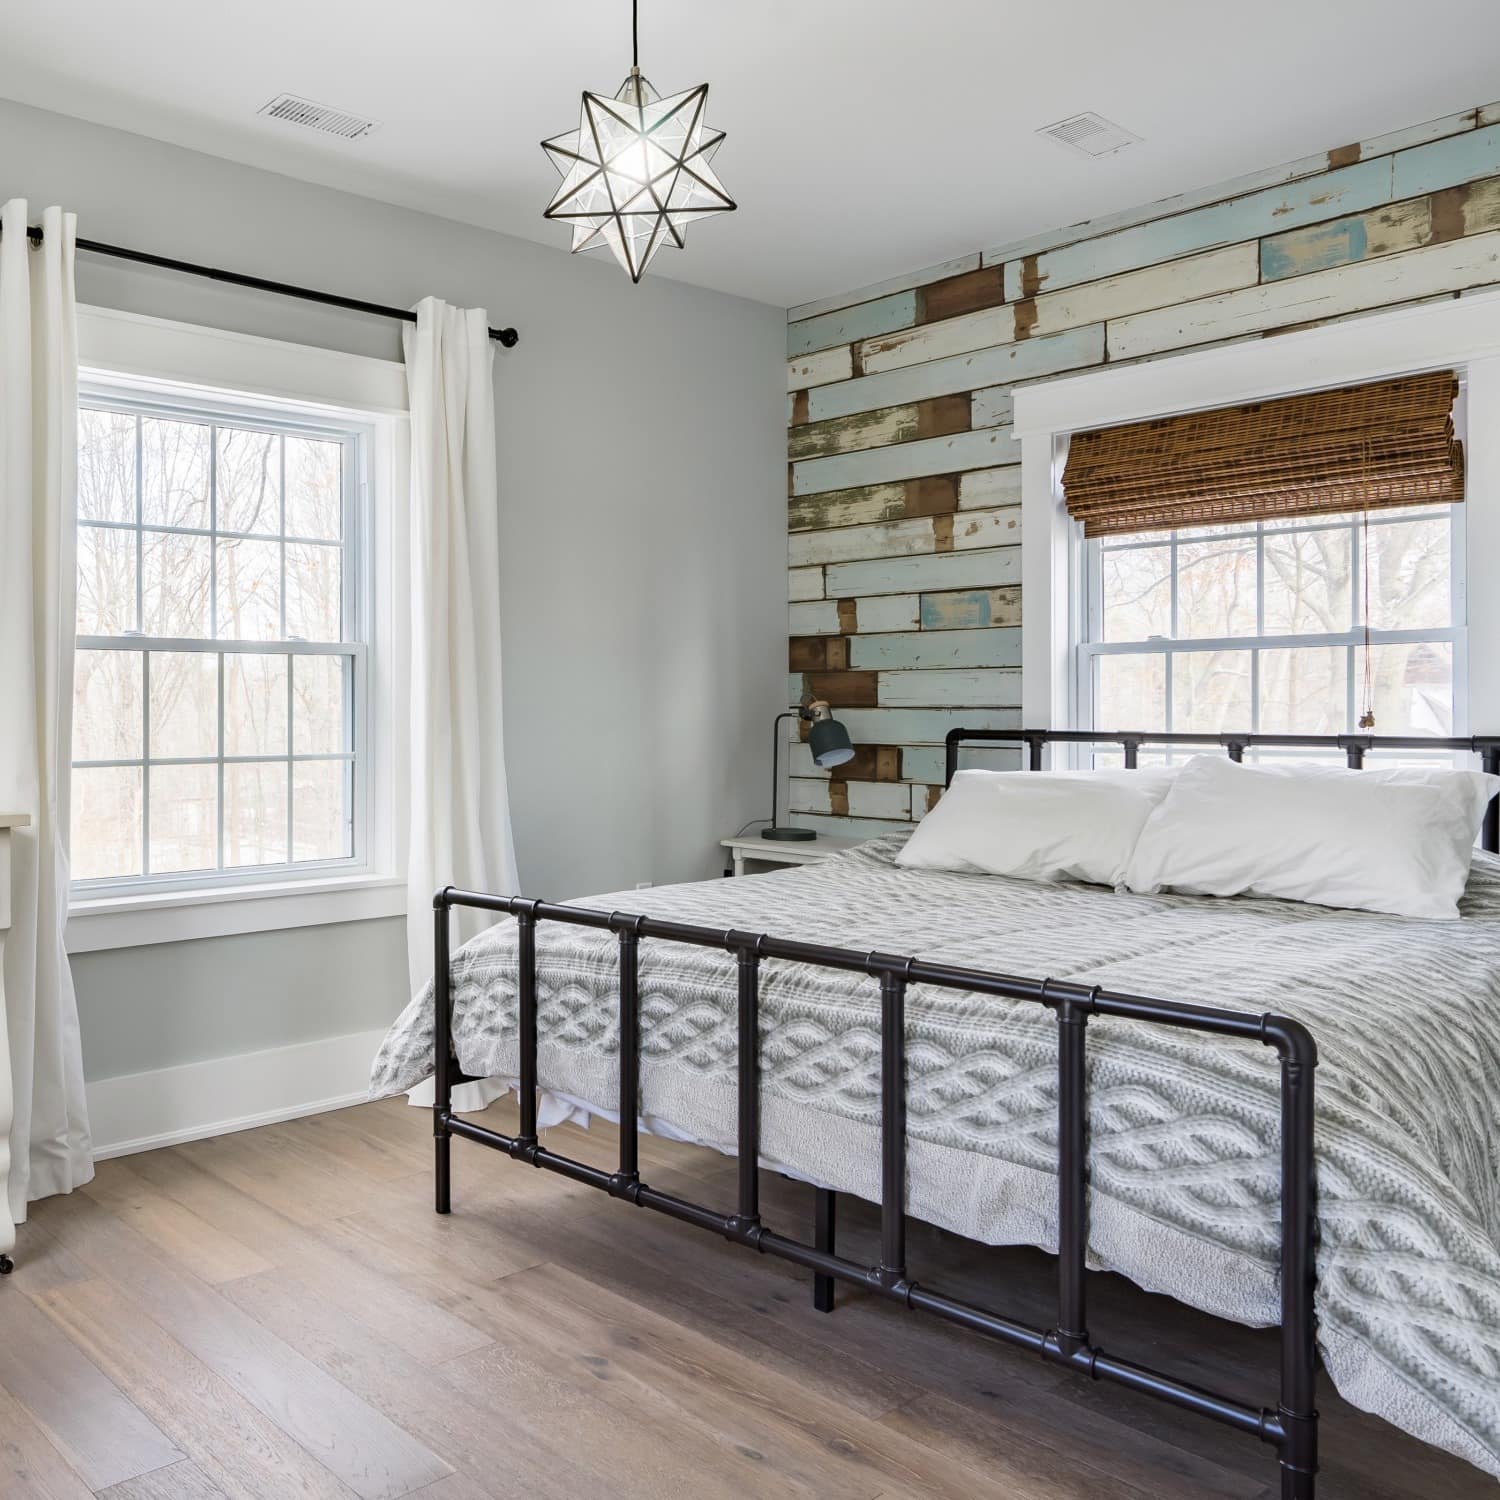 A spacious bedroom with hardwood floors, wood-panelled accent wall, a king size bed, and rustic decor.